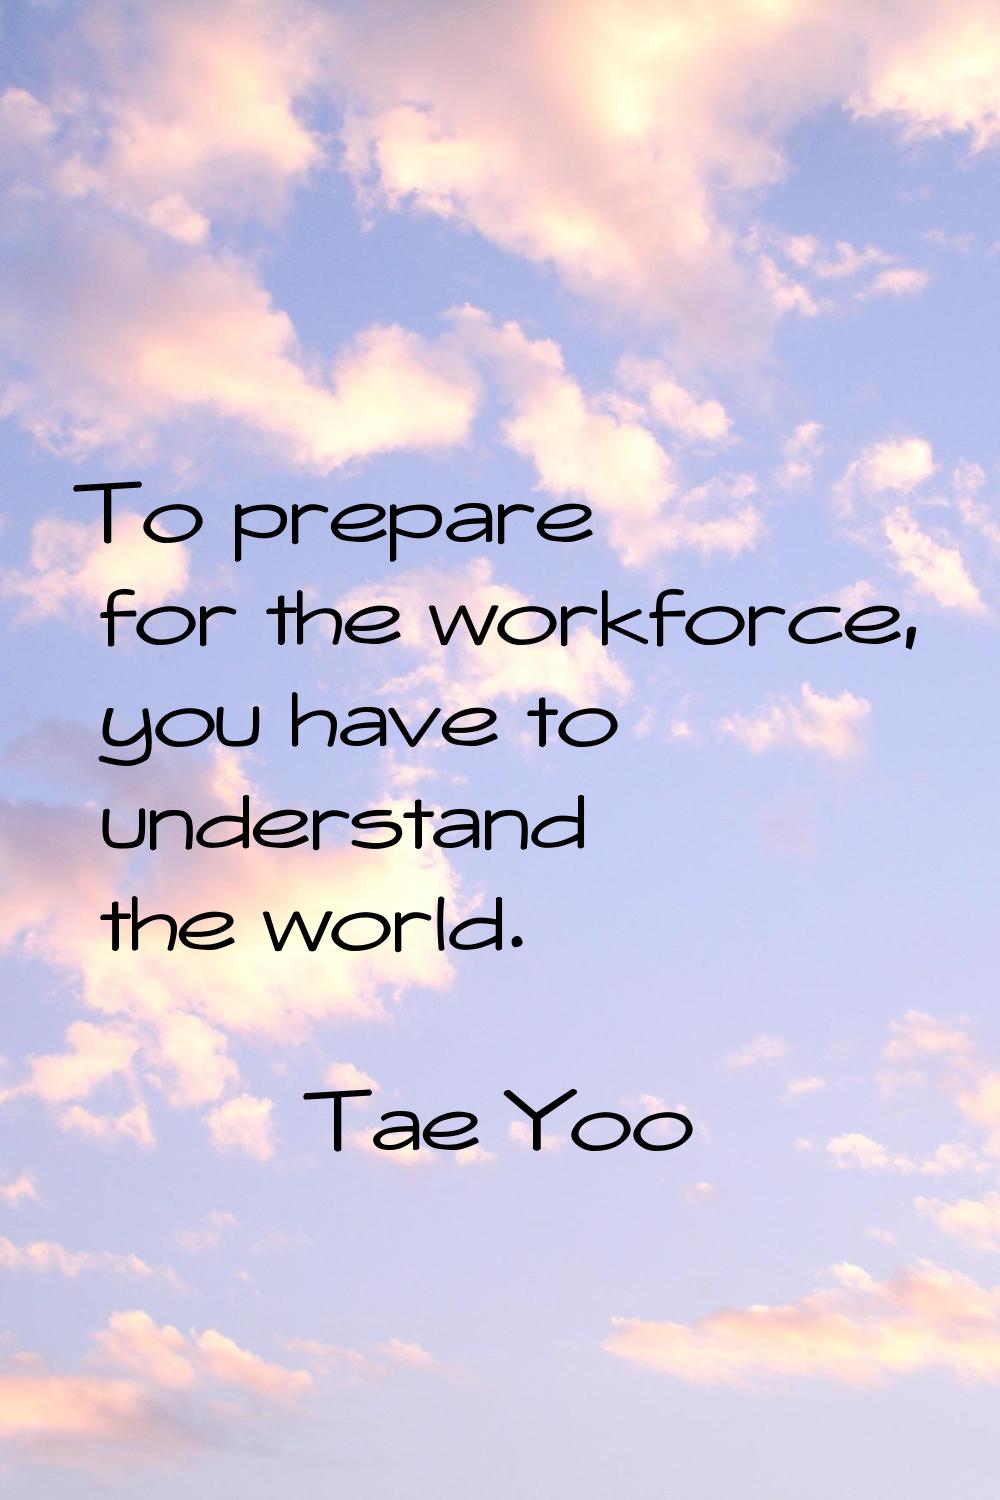 To prepare for the workforce, you have to understand the world.